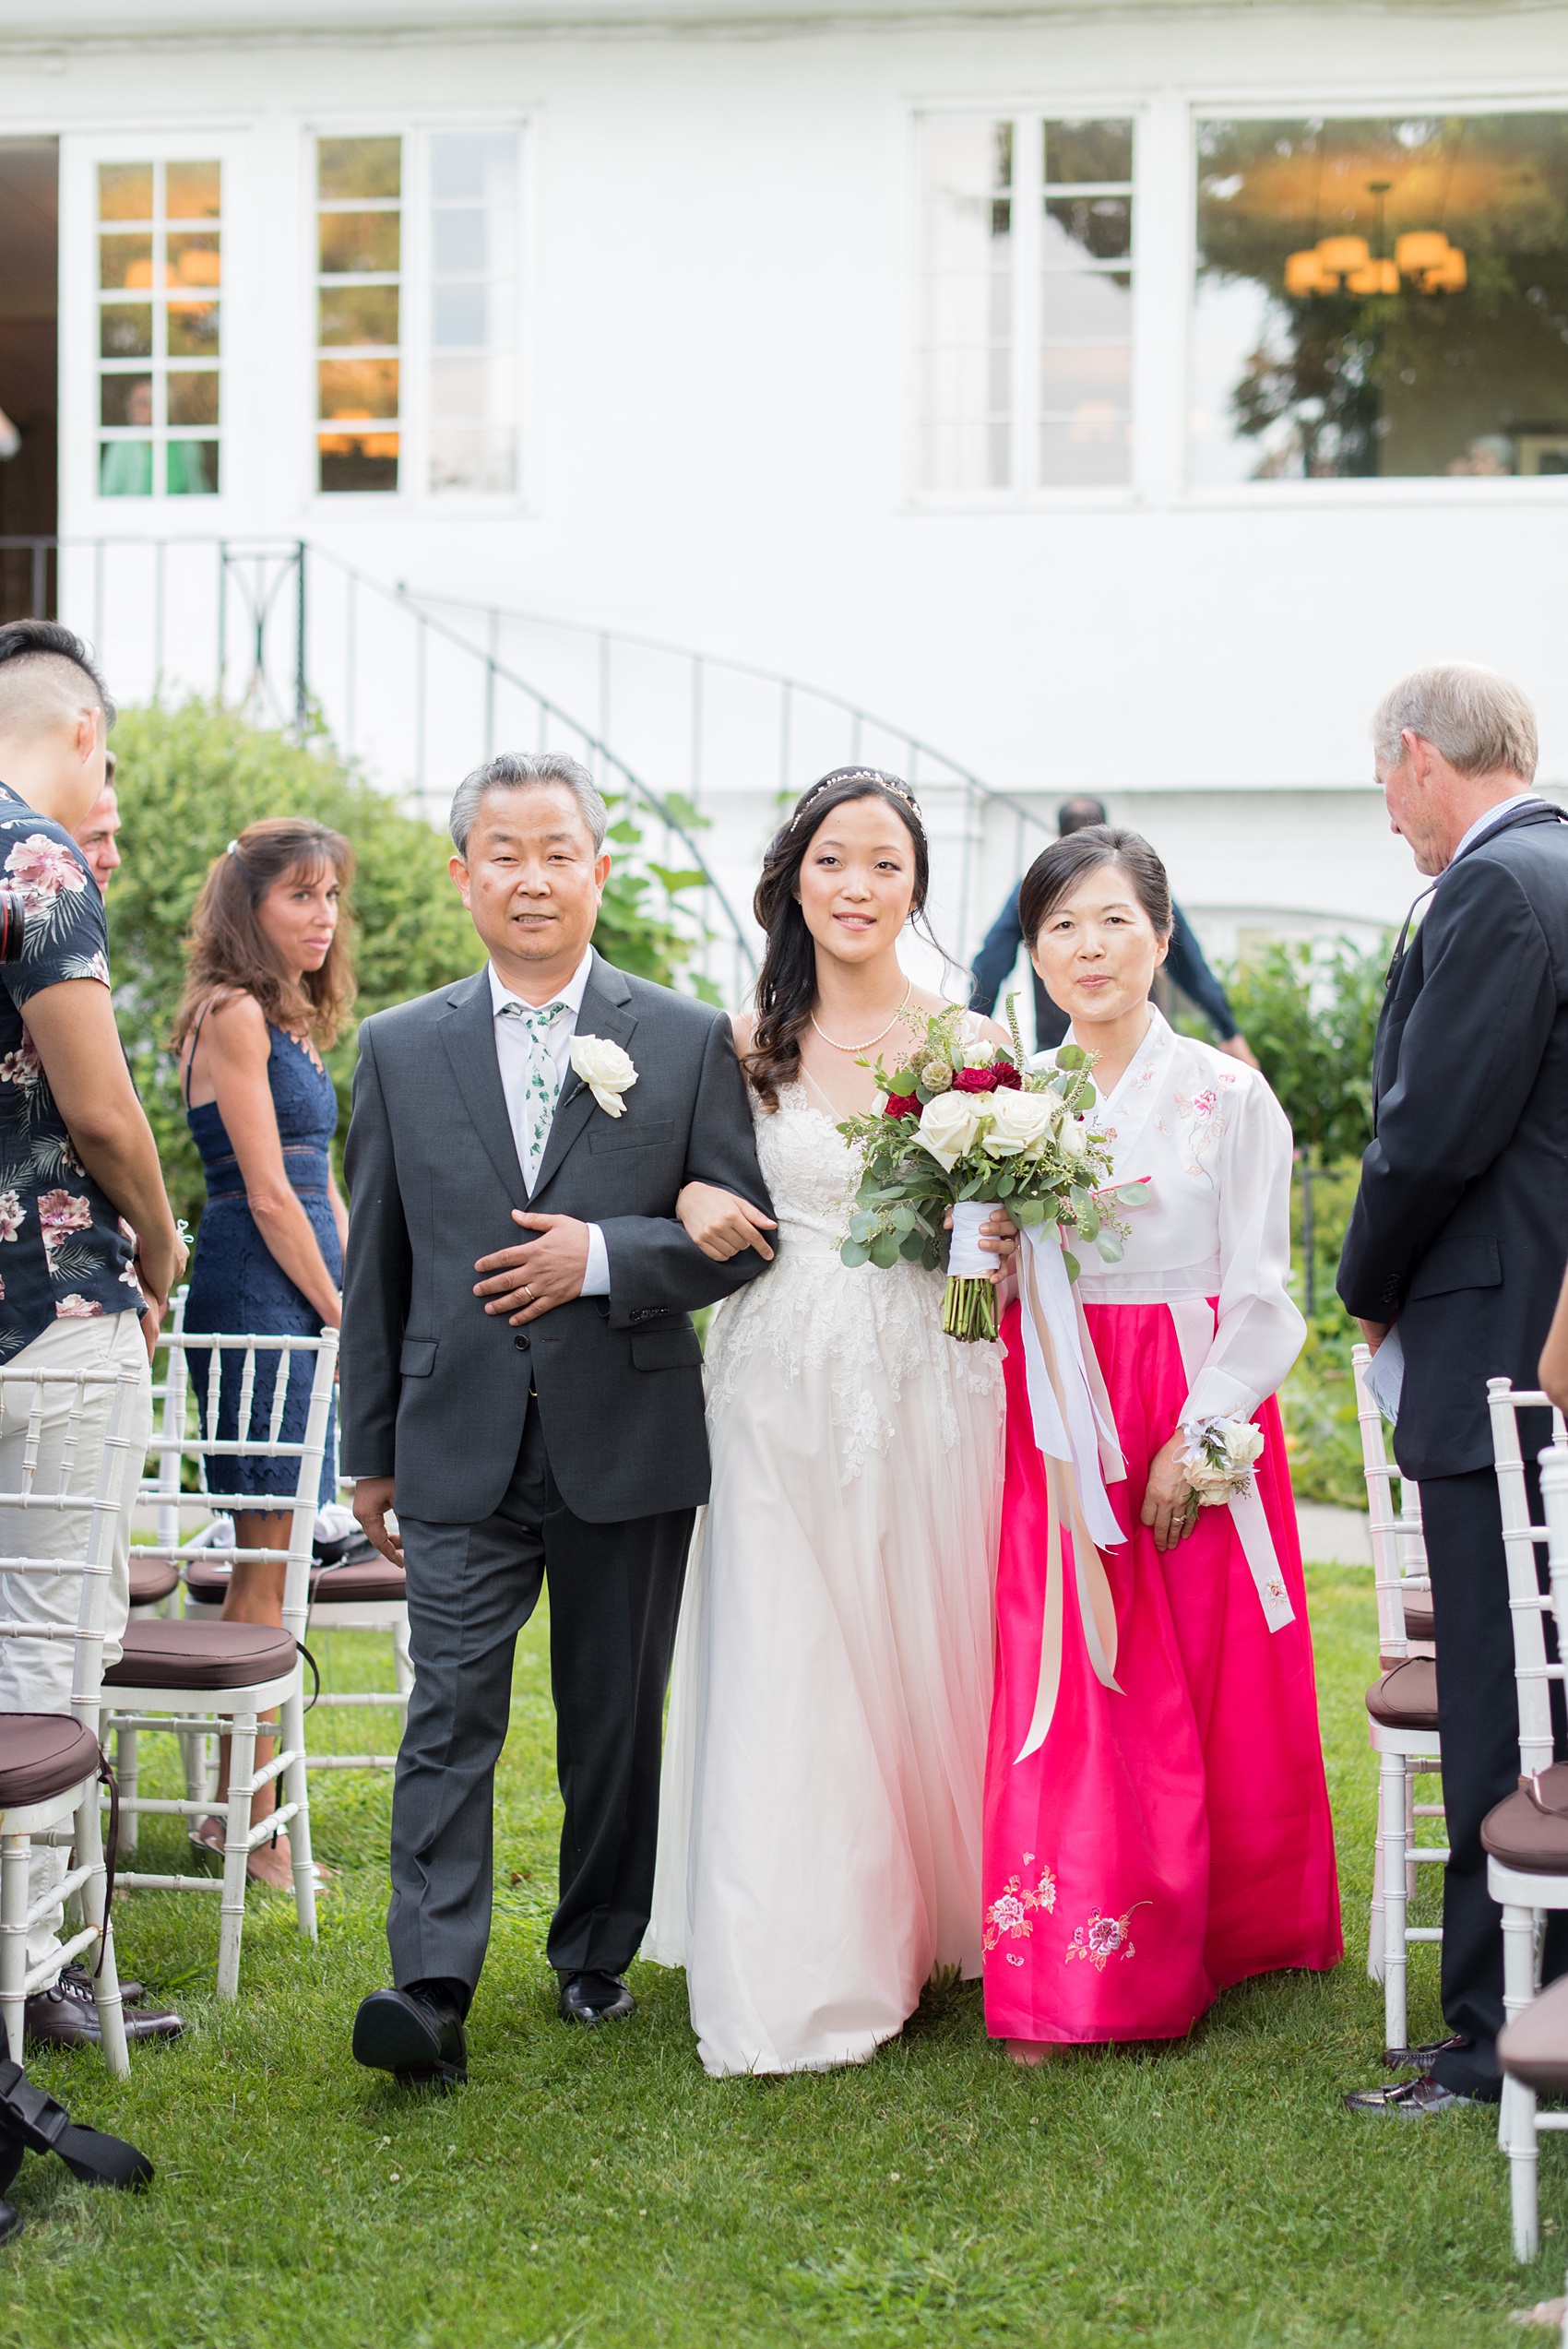 Wedding photos at Crabtree's Kittle House in Chappaqua, New York by Mikkel Paige Photography. This venue in Westchester county is a beautiful location for an outdoor summer wedding. Click through for more inspiration from their day! #mikkelpaige #CrabtreesKittleHouse #WestchesterWeddingVenues #WestchesterWedding #summerwedding #weddingceremony #outdoorceremony